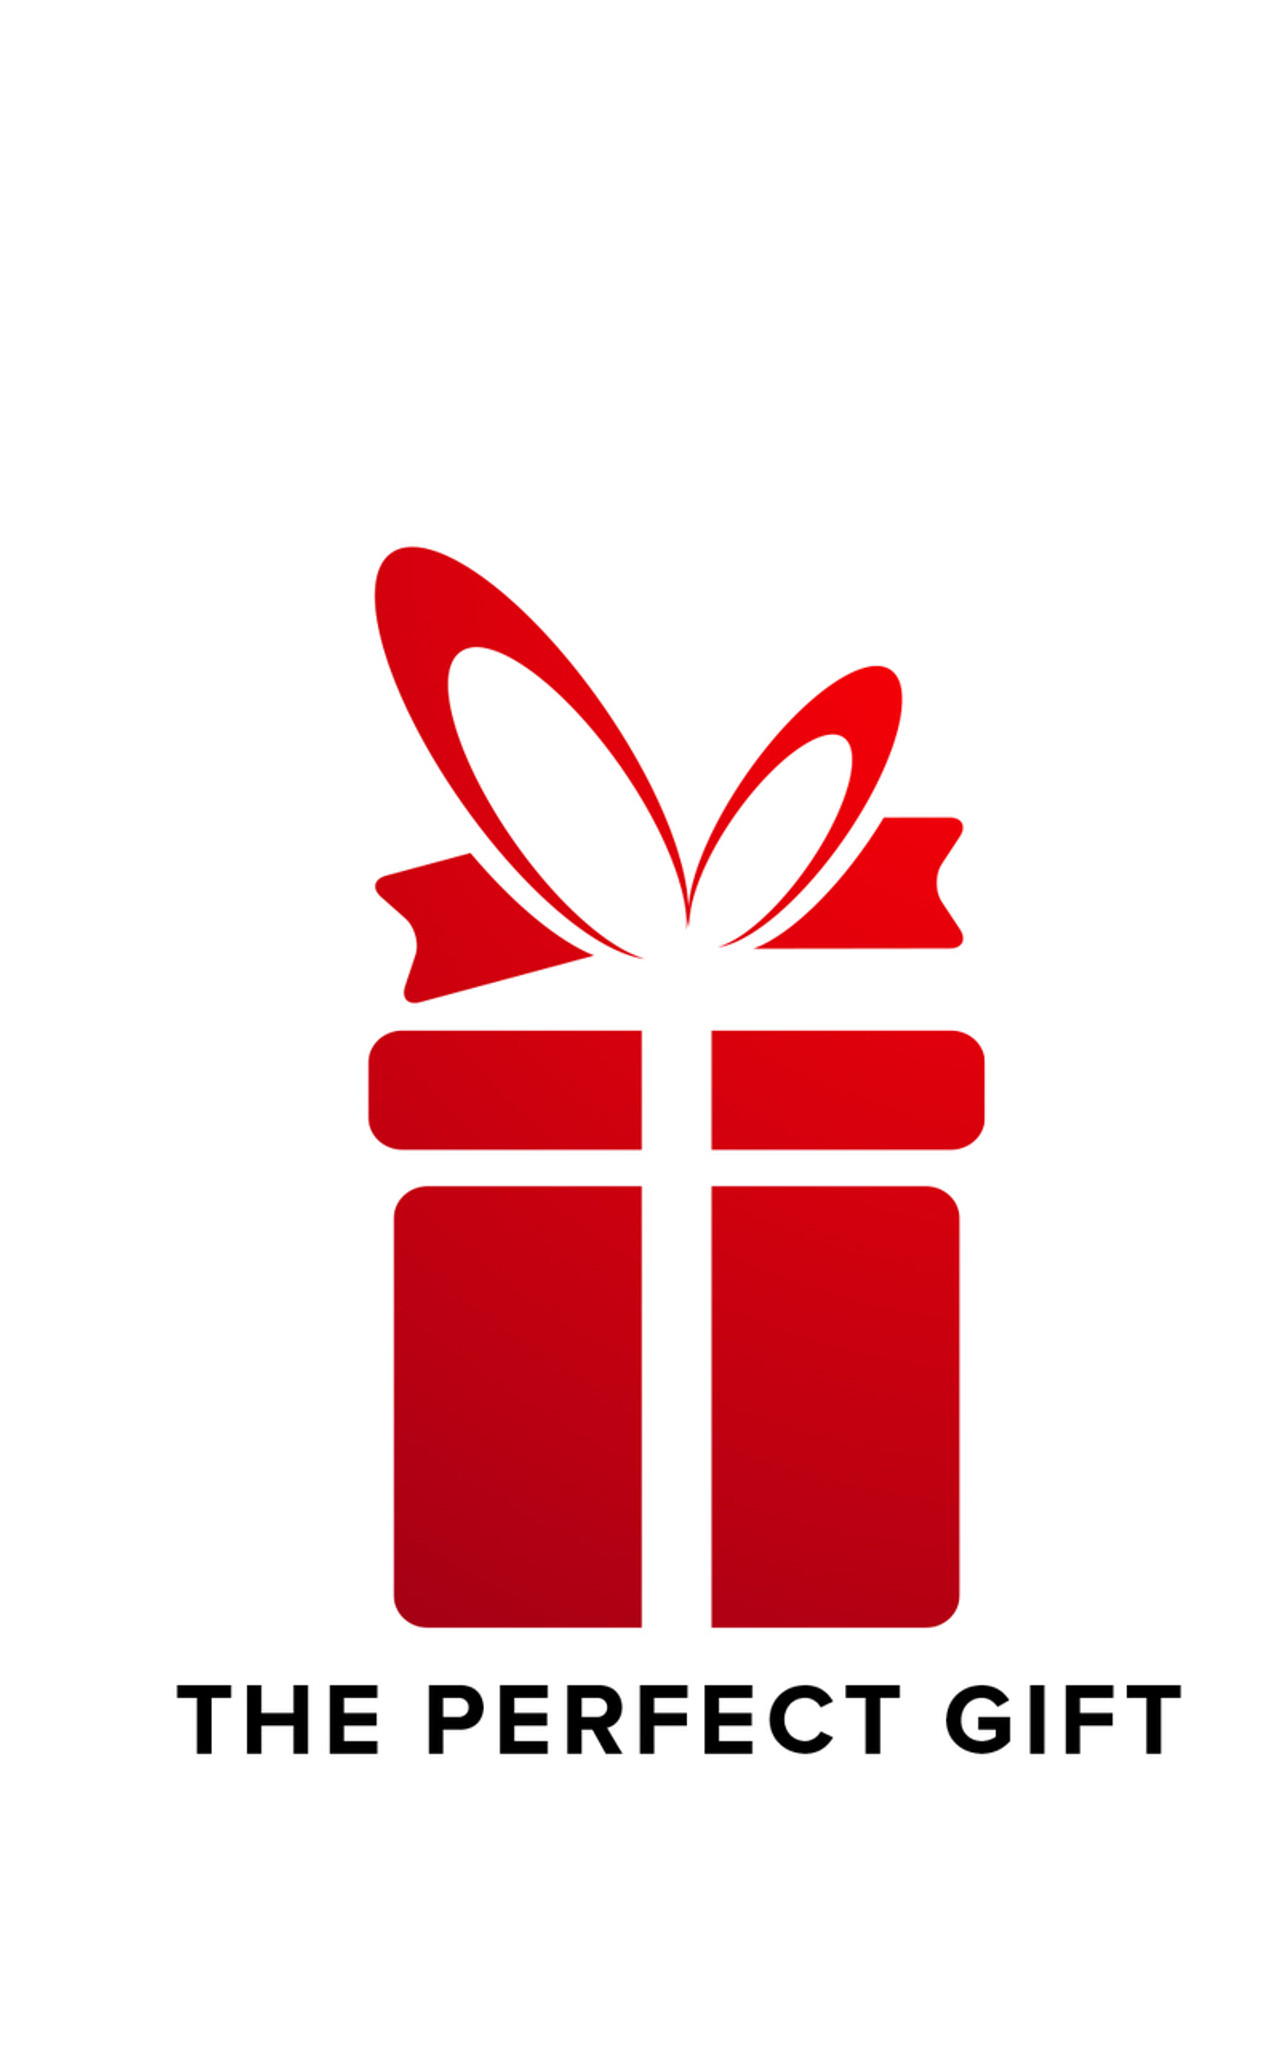 The Perfect Gift - Wikipedia